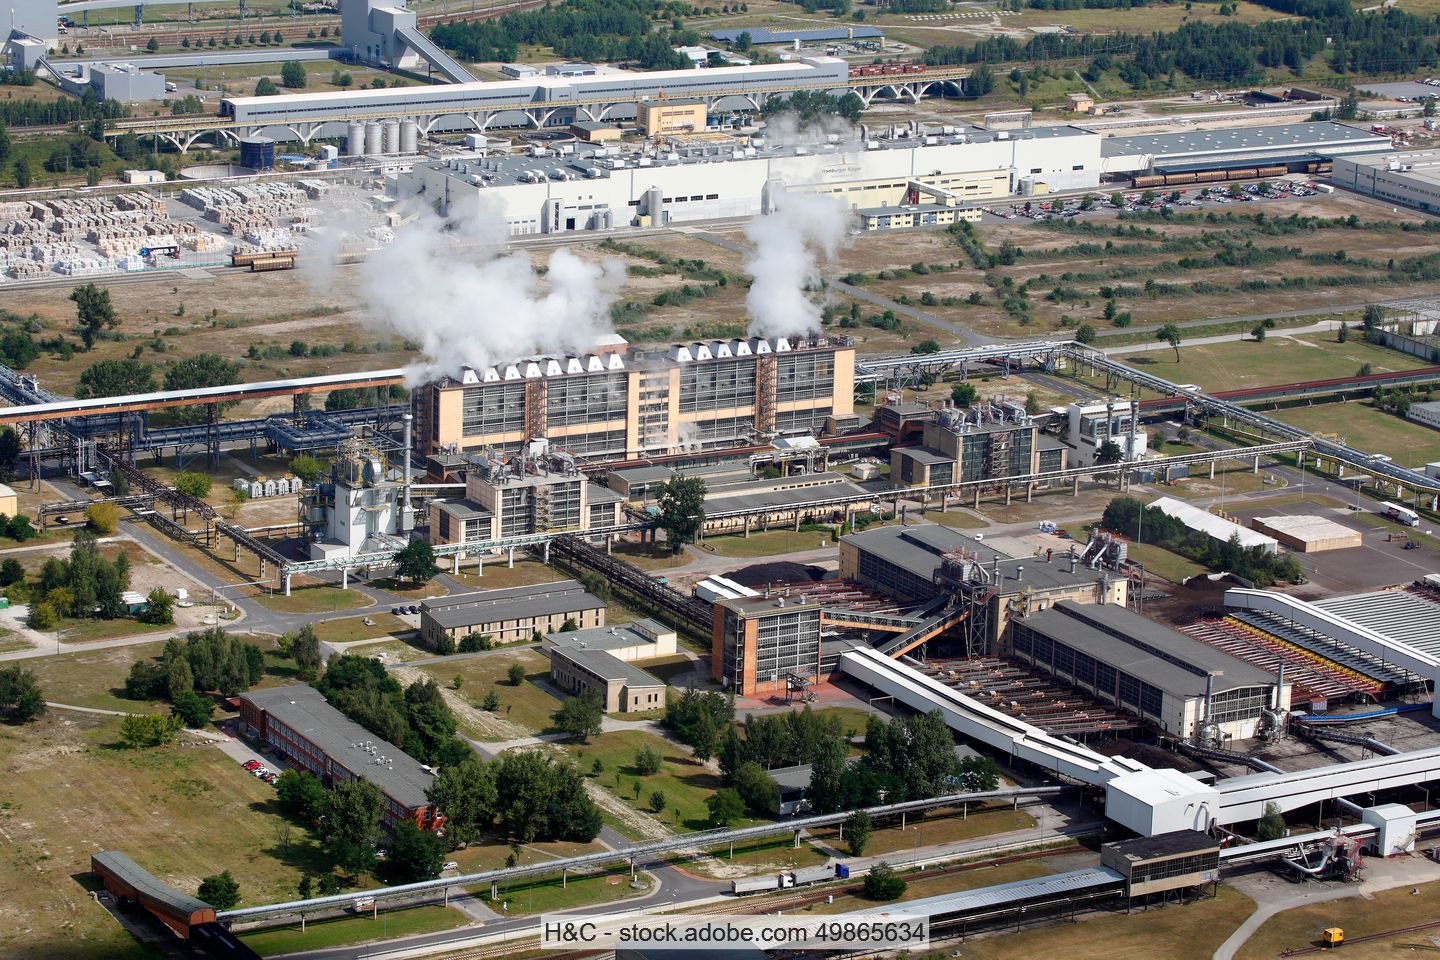 Aerial view of the industrial park Schwarze Pumpe near Spremberg, Germany, where Hamburger Rieger's paper mill and RDF power plant are located.